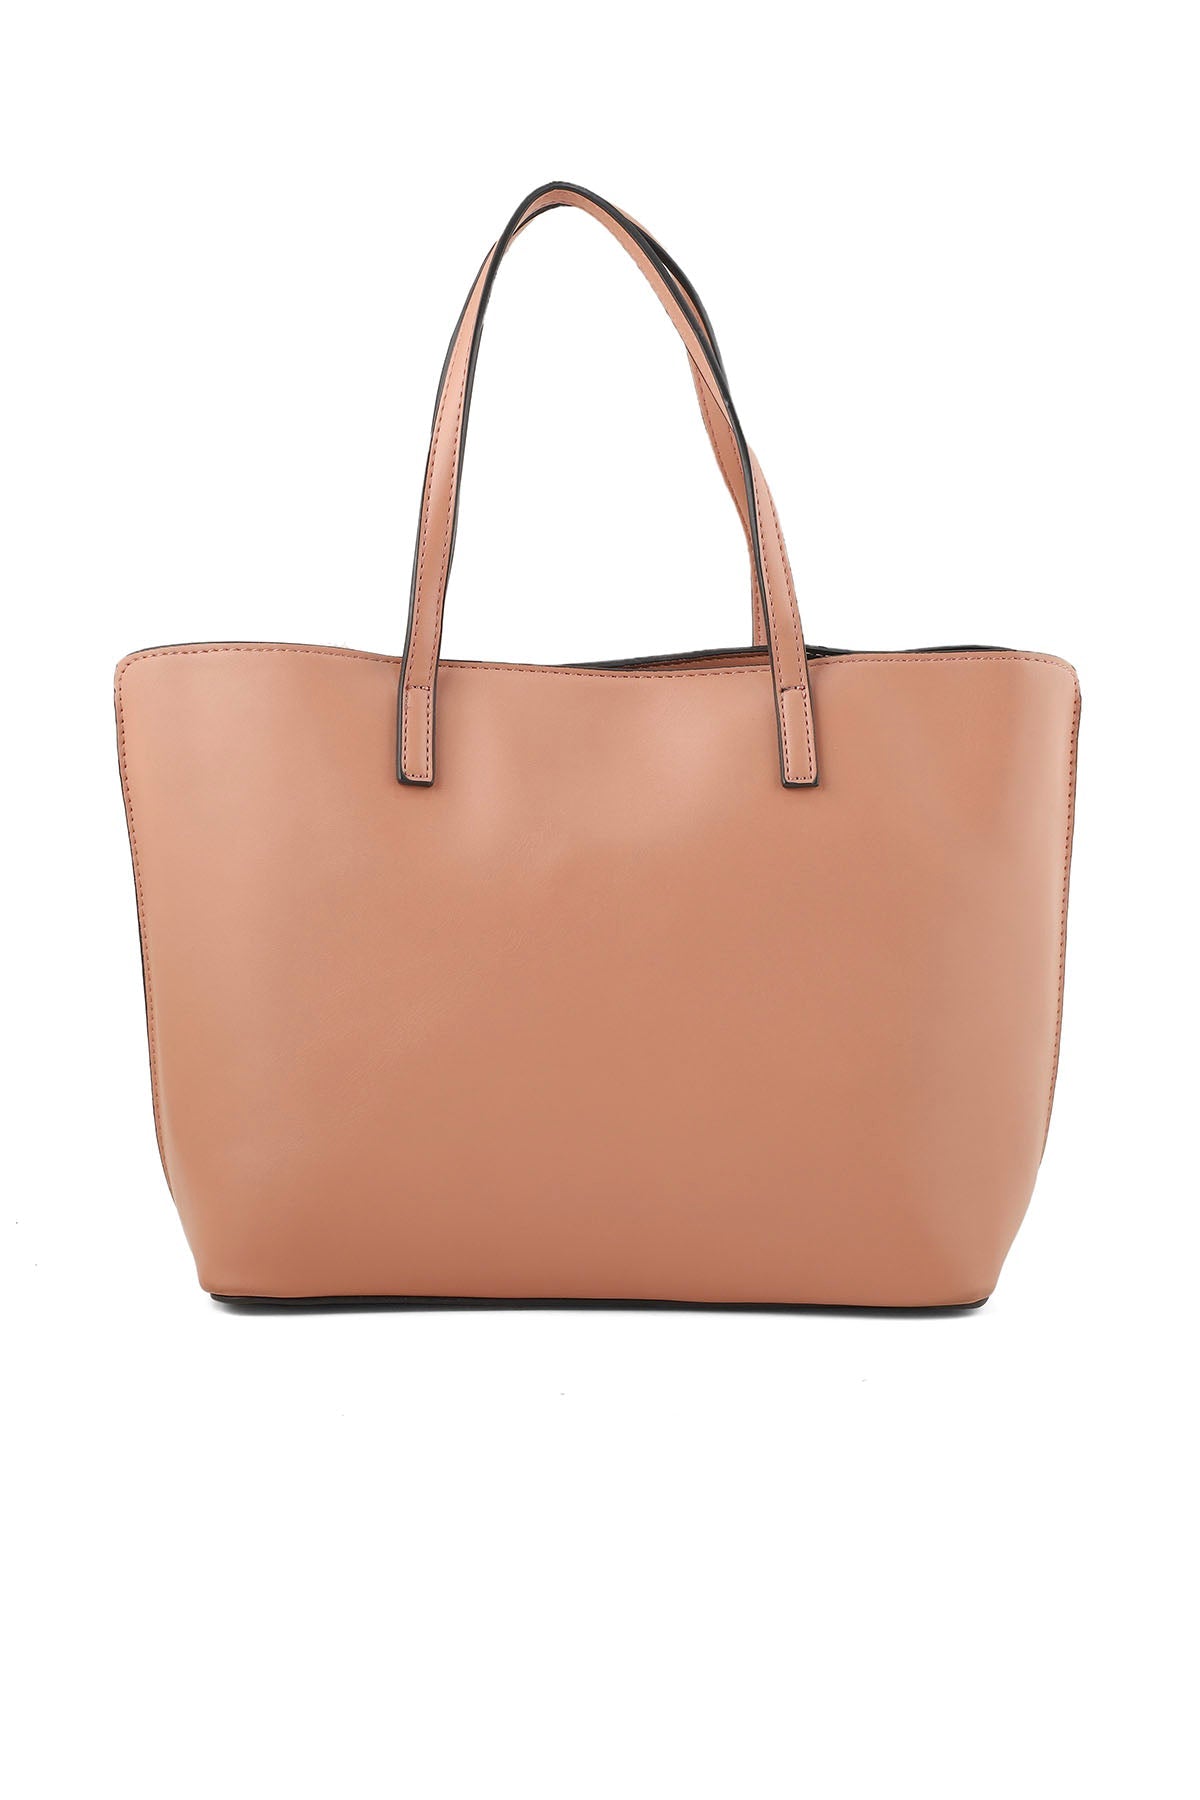 Casual Tote Hand Bags B14793-Pink